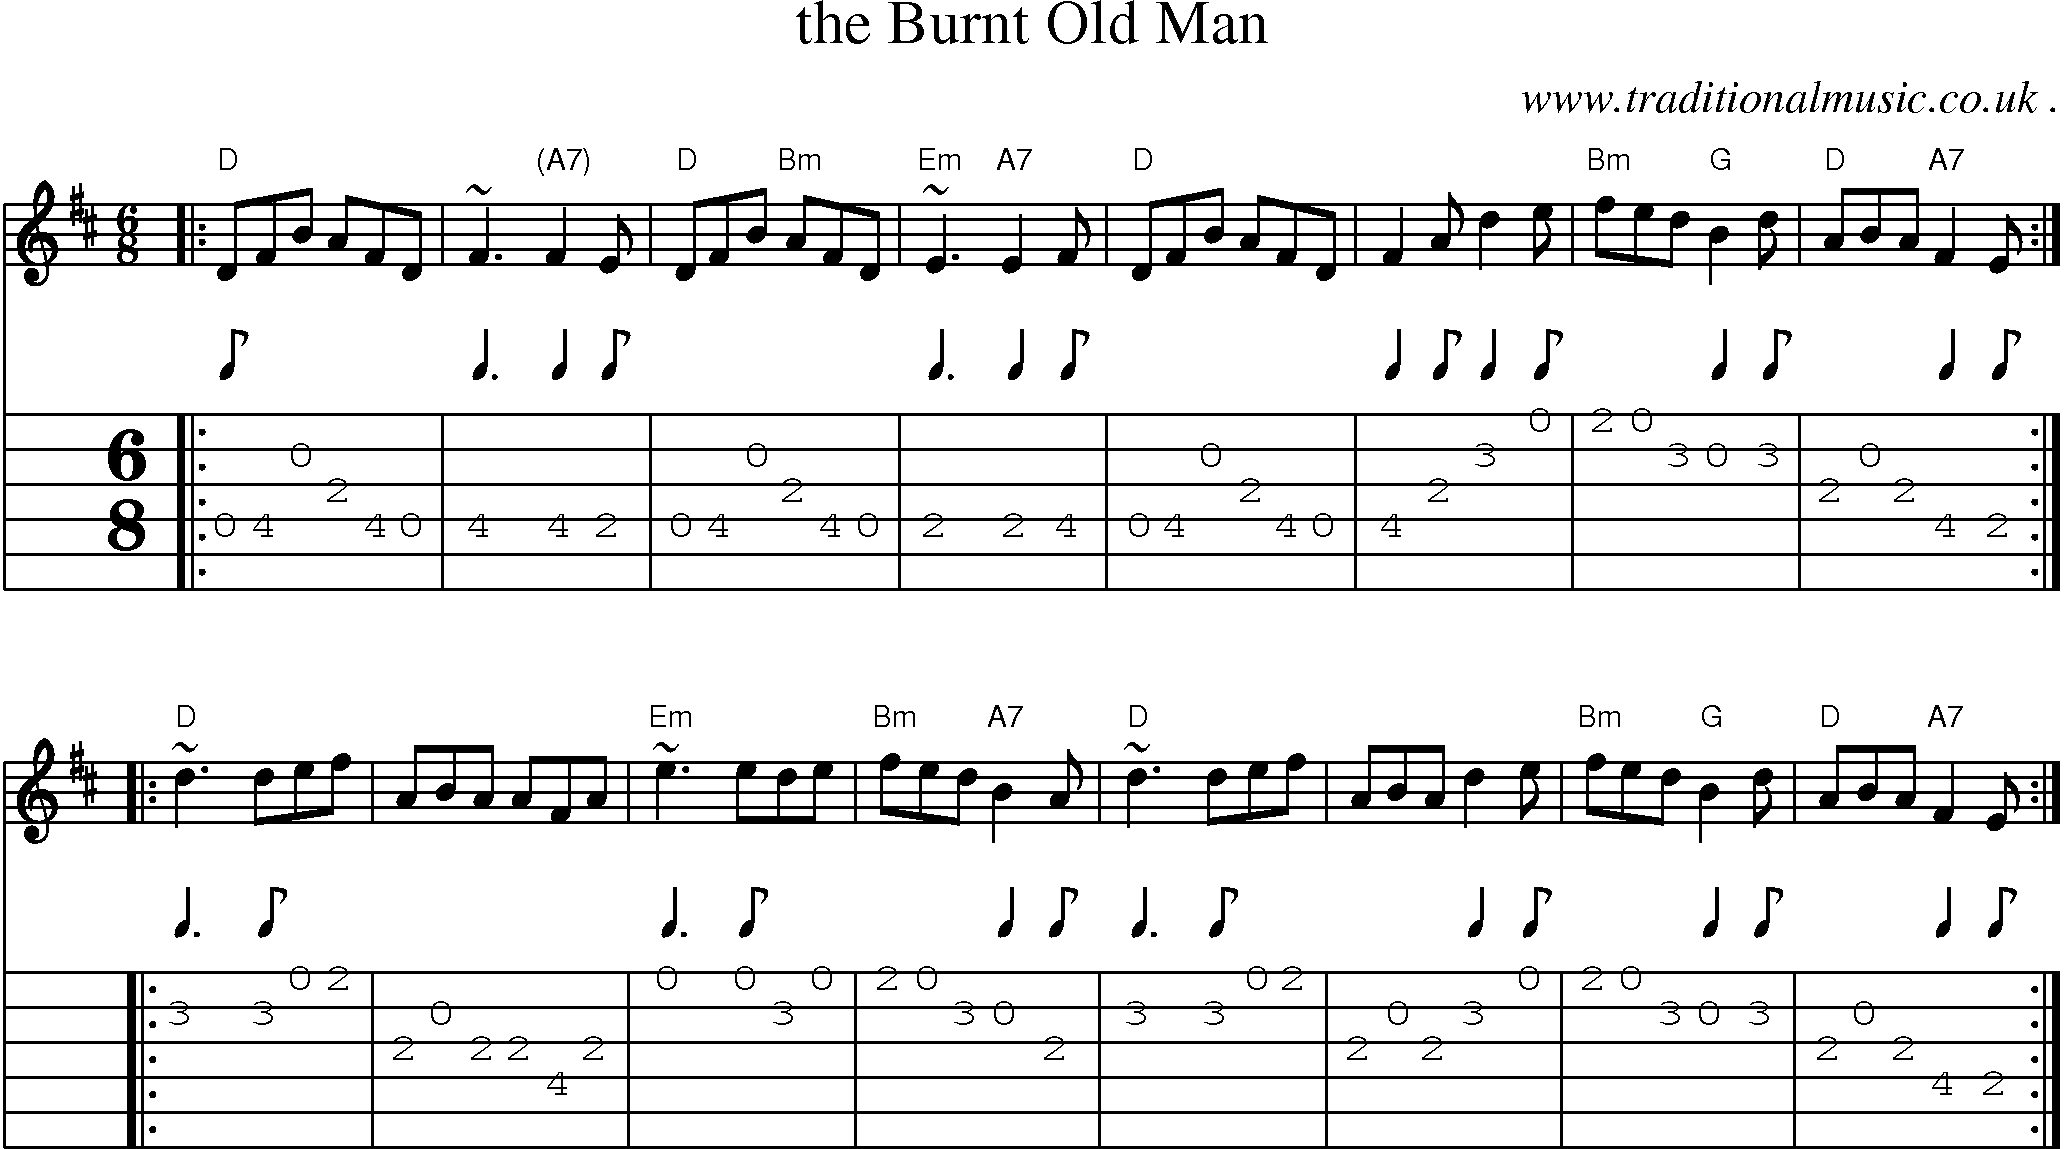 Sheet-music  score, Chords and Guitar Tabs for The Burnt Old Man